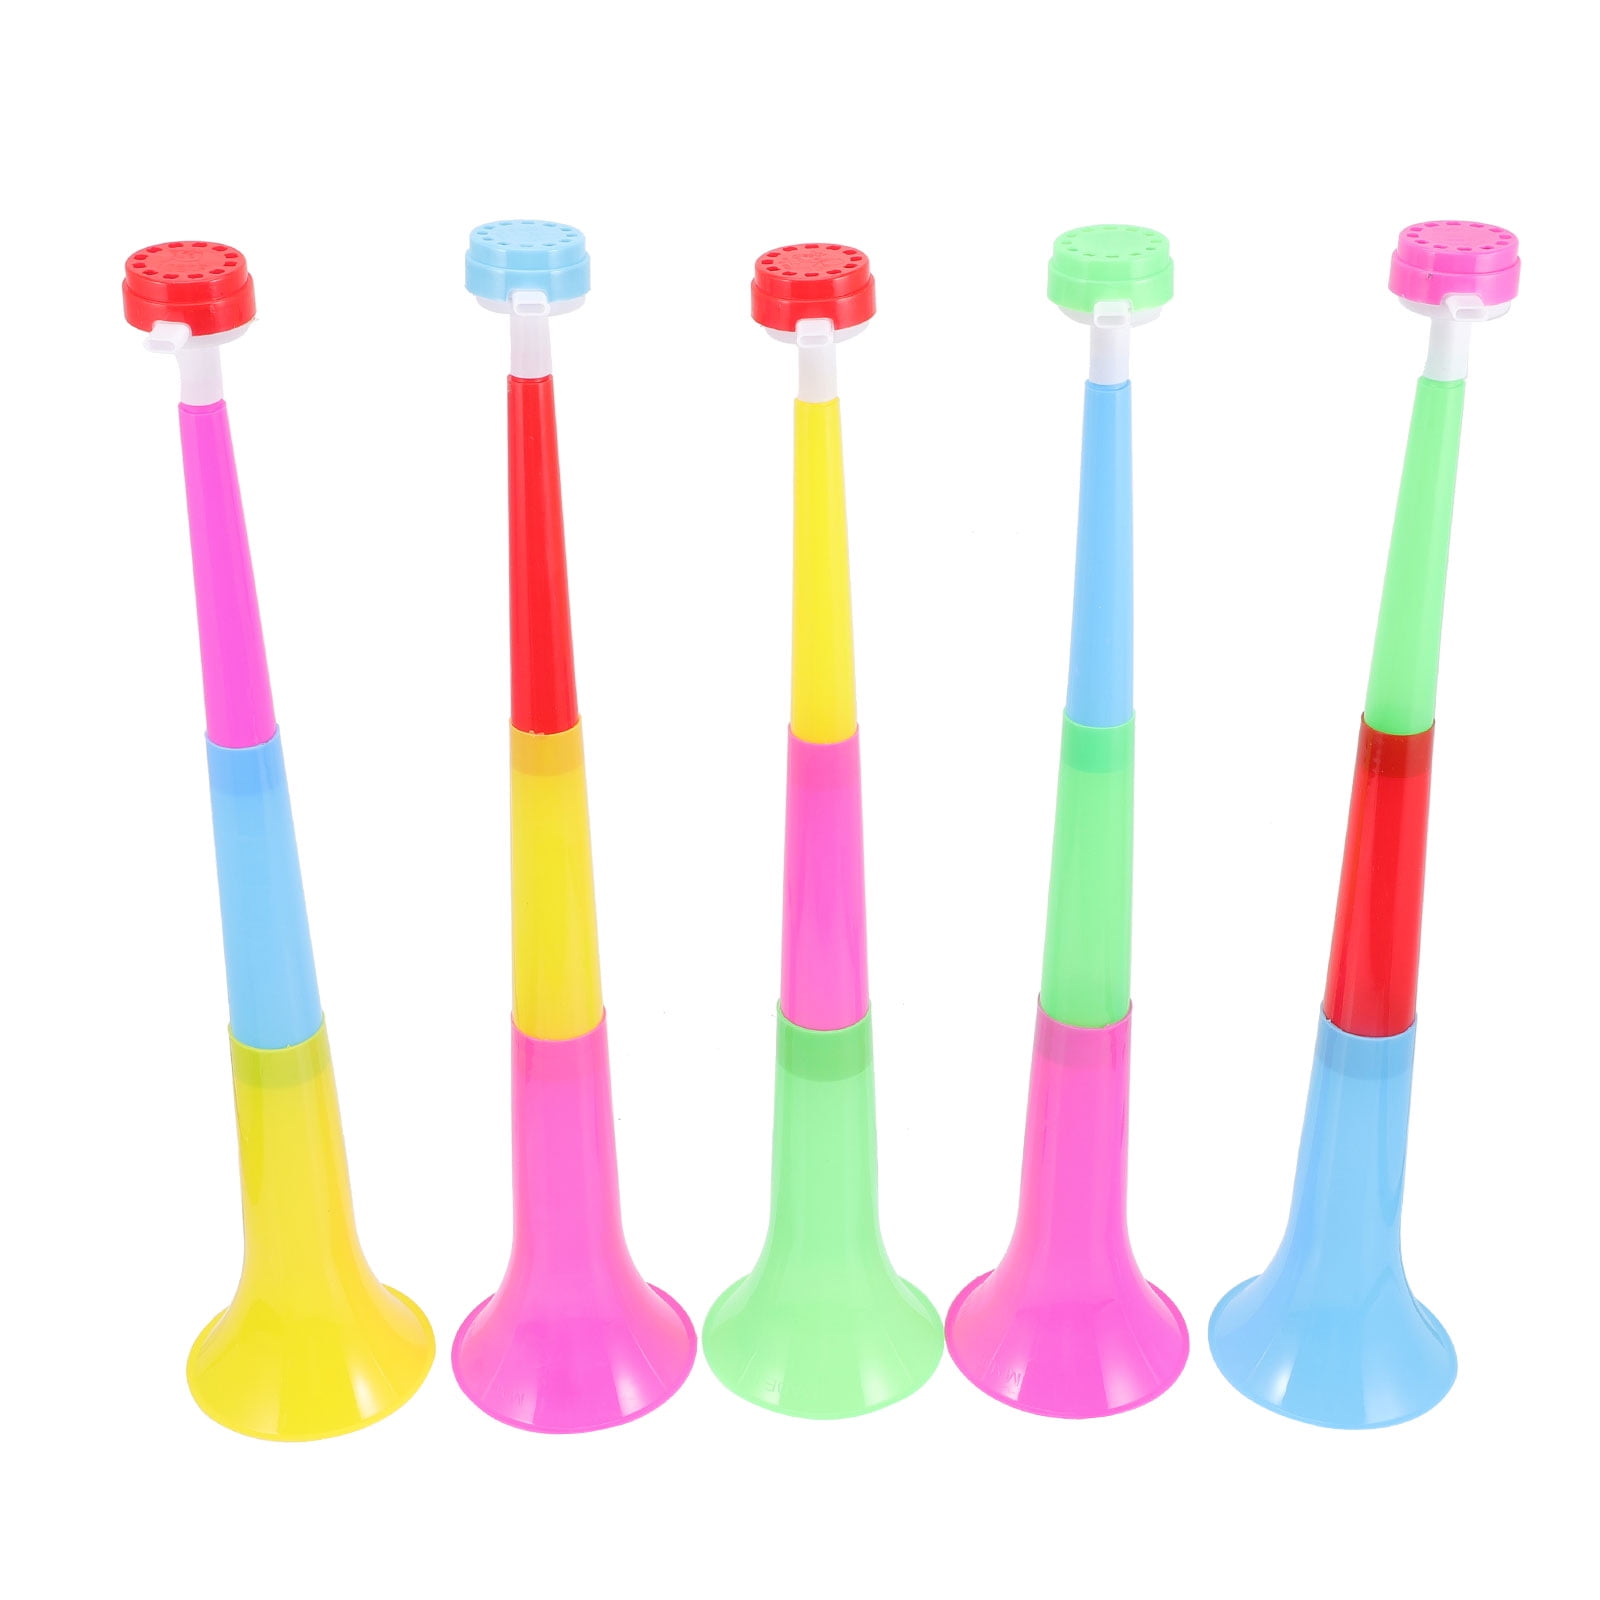 Wholesale Melody Musical Air Horn For Sale, Fun Kids Play And